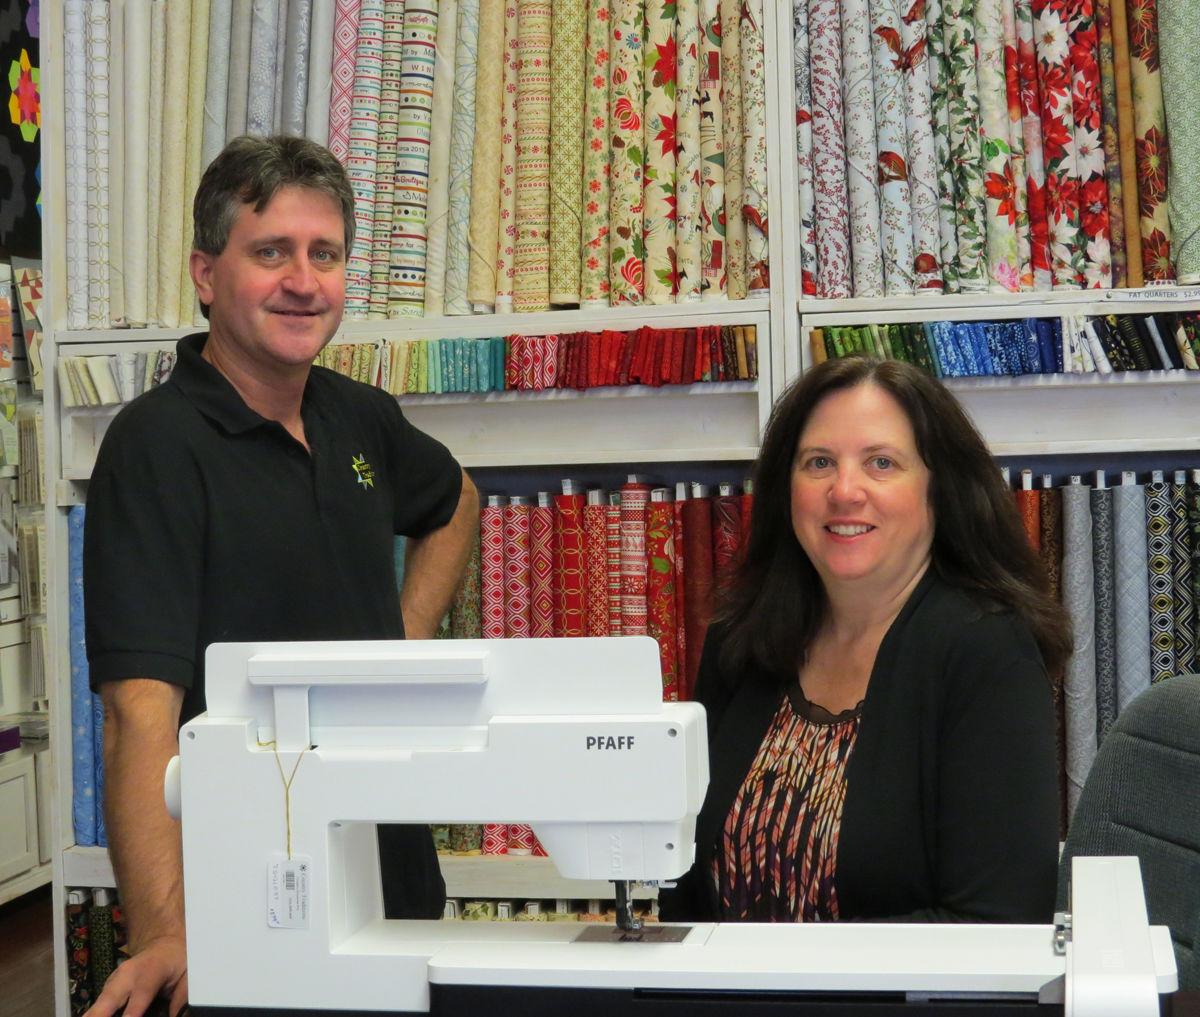 Mains put Fremont on the quilting map